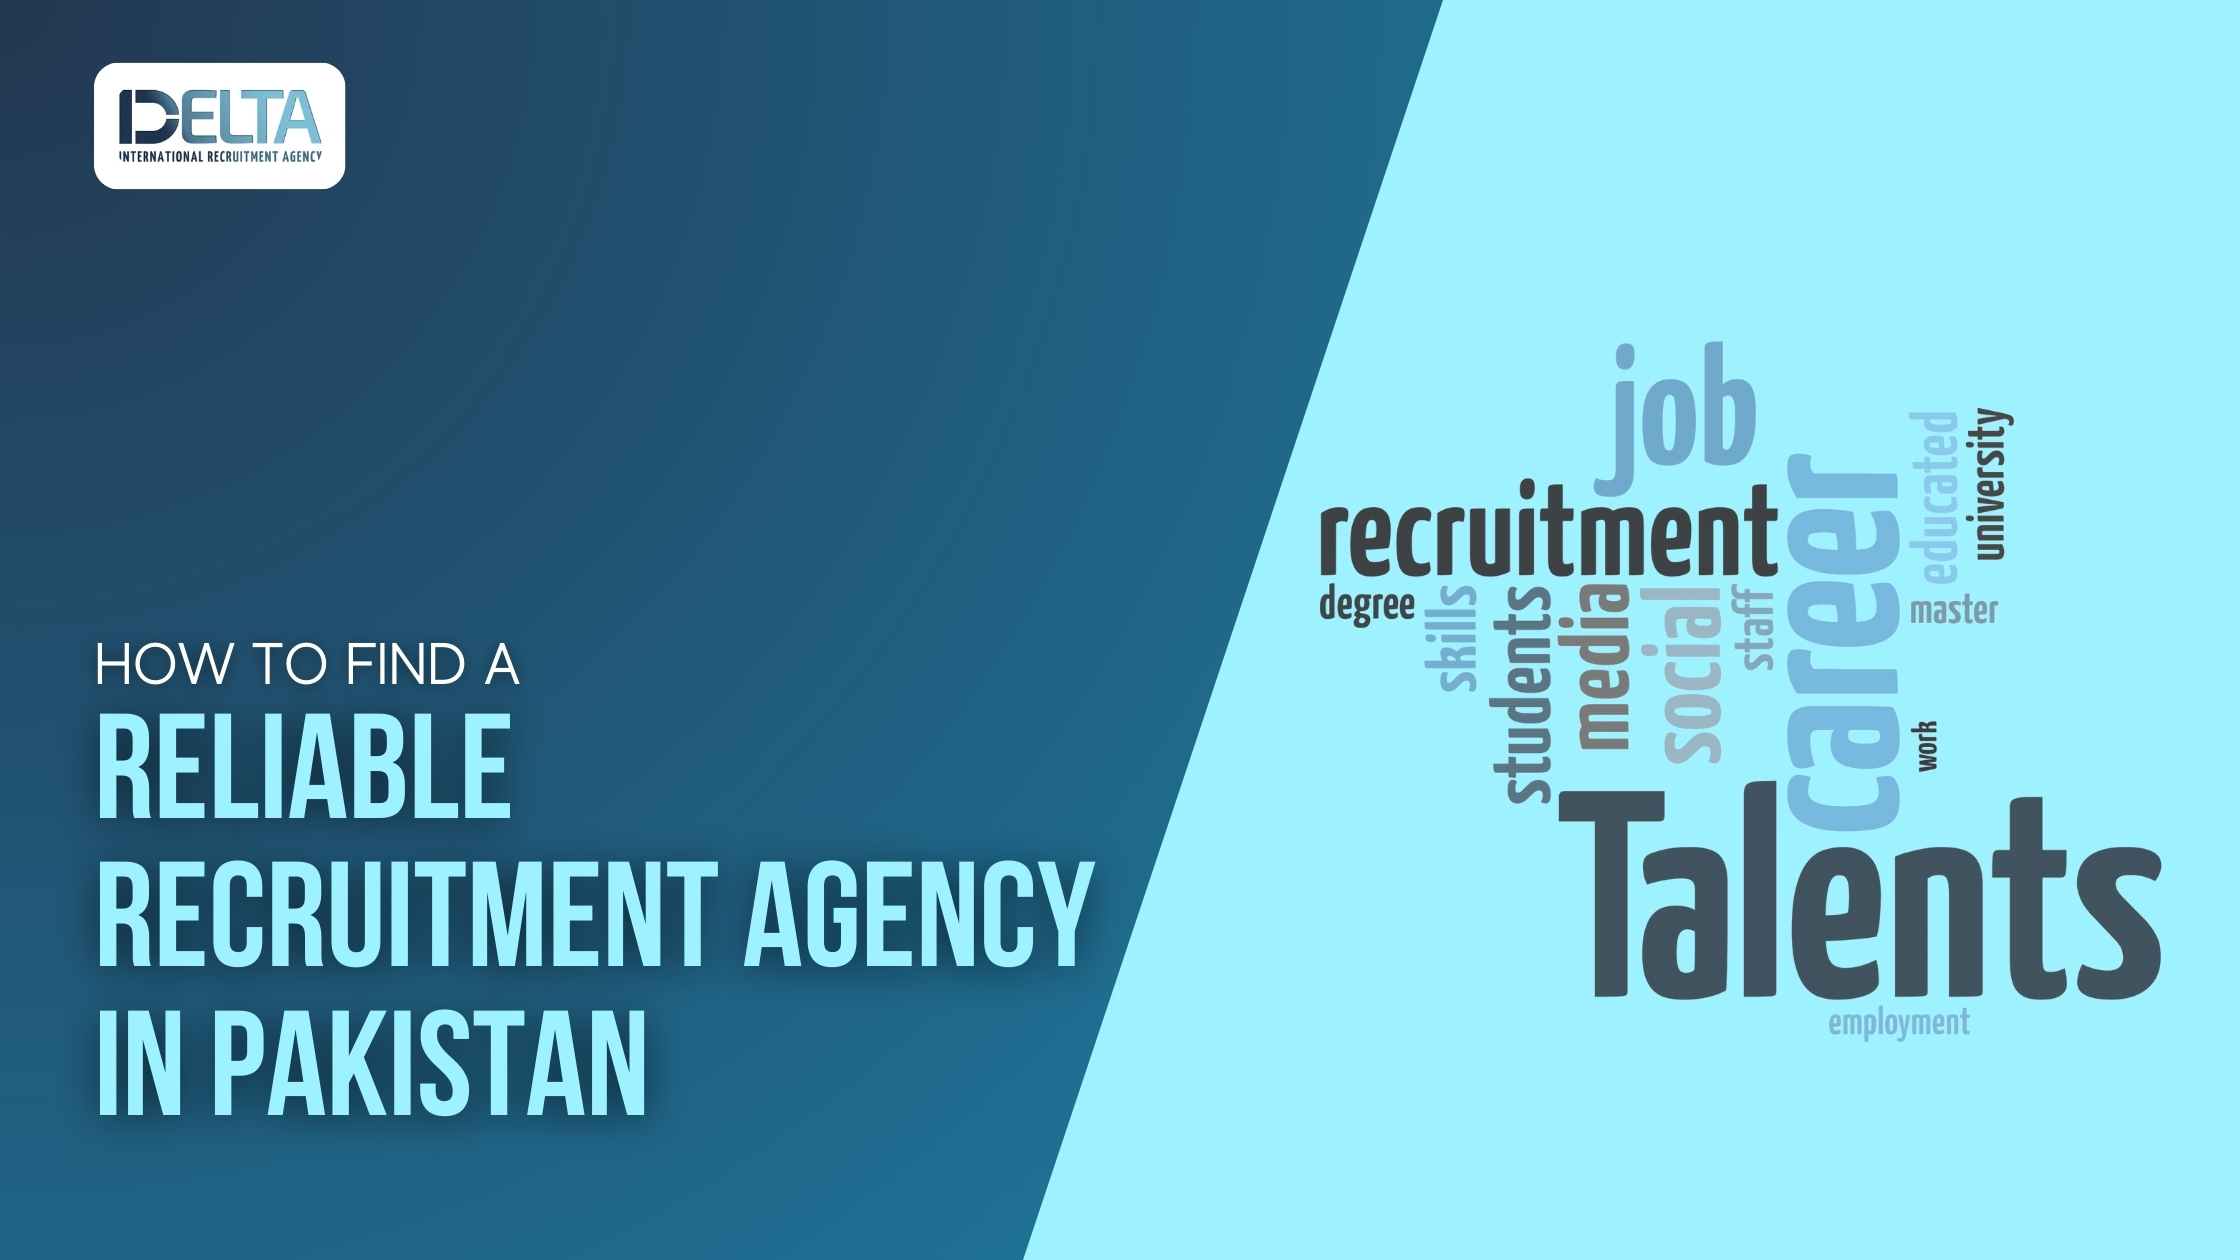 How to Find a Reliable Recruitment Agency in Pakistan?